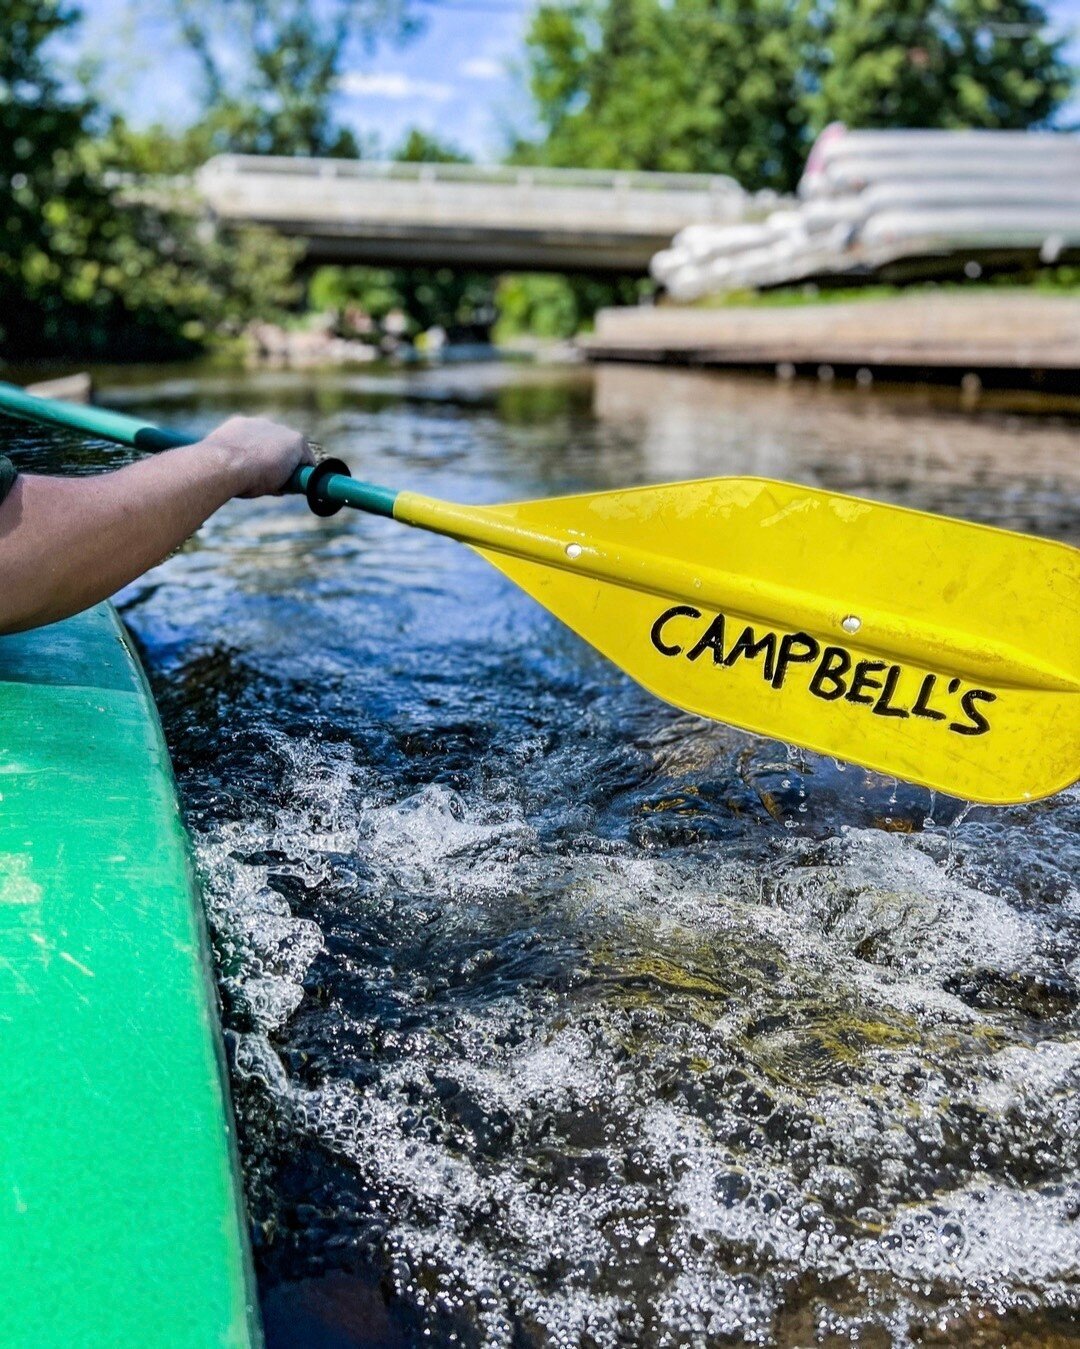 REMINDER TO ALL PADDLERS ‼️​​​​​​​​
​​​​​​​​
Open by reservation only Monday through Thursday 10 AM to 4 PM￼￼. ​​​​​​​​
​​​​​​​​
You can ￼book online at campbellscanoes.com/booking￼ or call us at 989-275-5810.​​​​​​​​
￼​​​​​​​​
Labor Day weekend hour